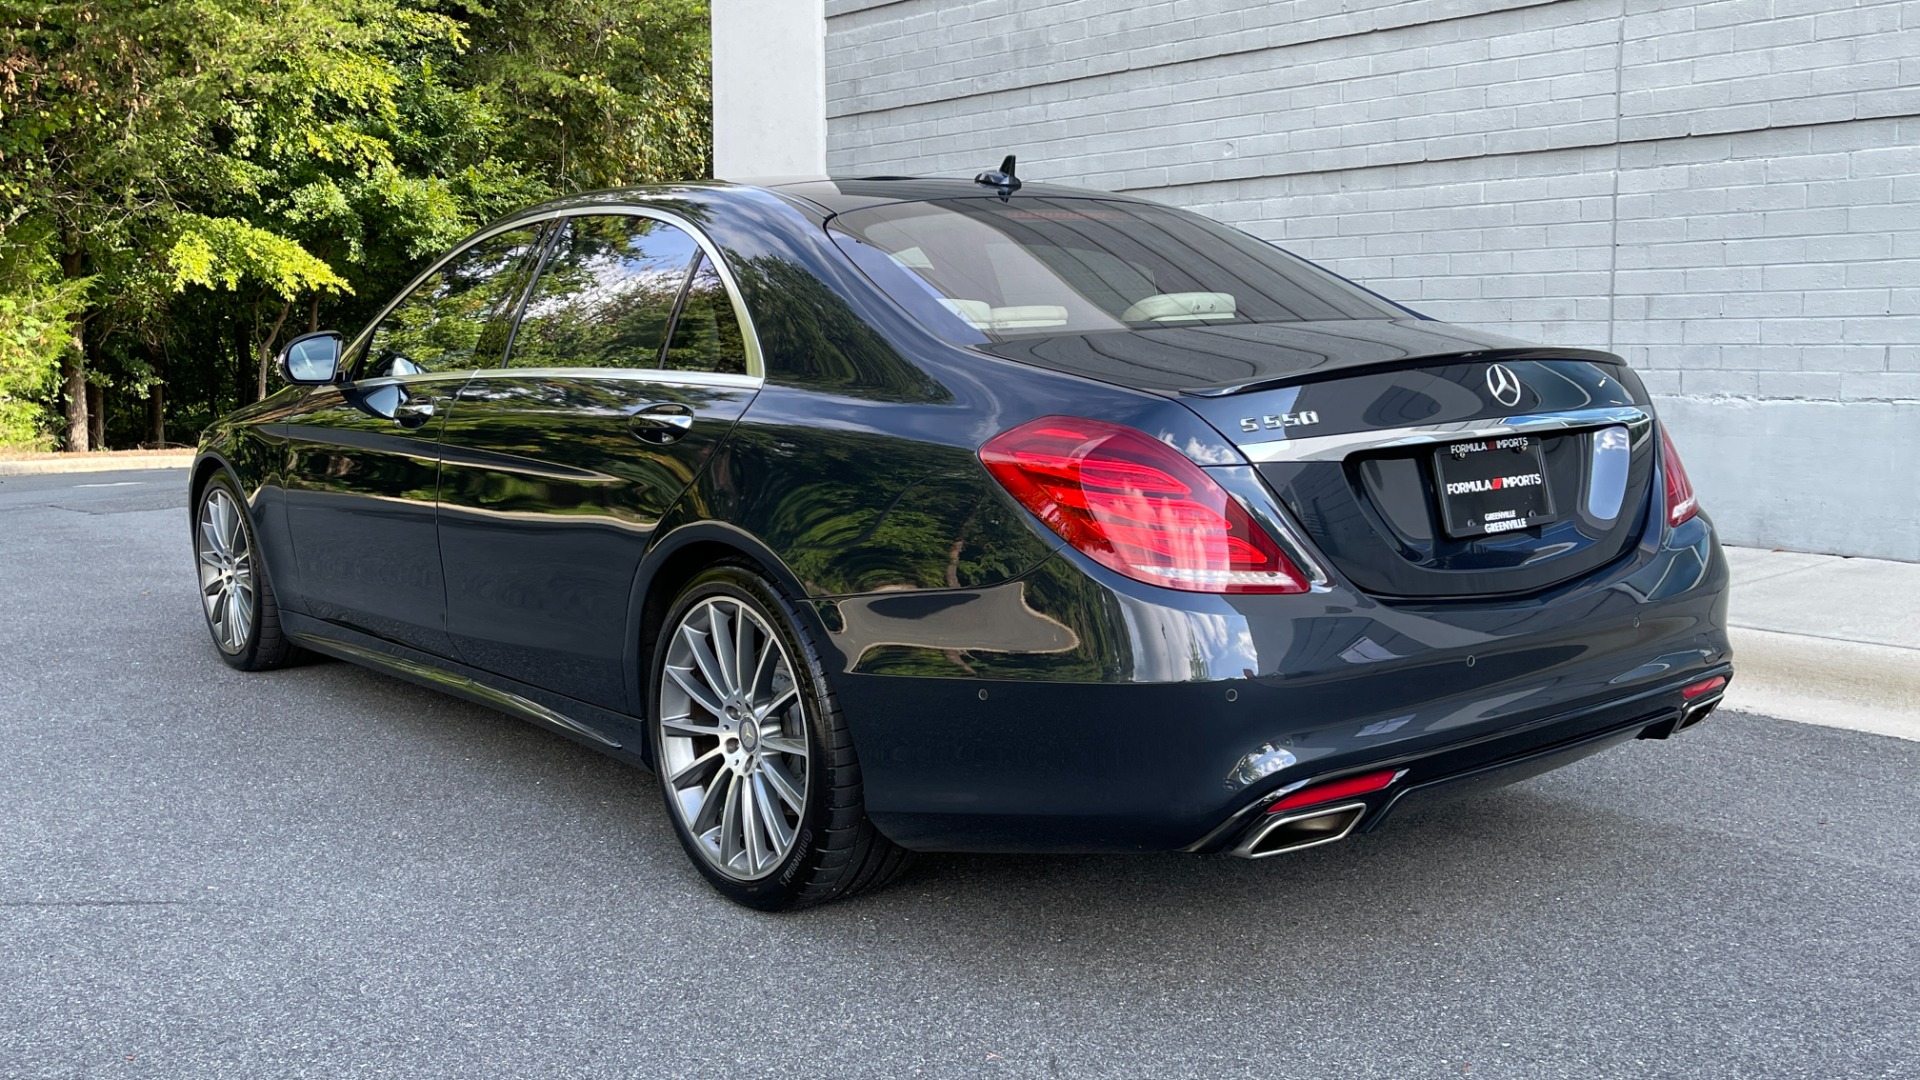 Used 2015 Mercedes-Benz S-Class S550 / REAR SEATING PACKAGE / PREMIUM / DRIVER ASSISTANCE for sale Sold at Formula Imports in Charlotte NC 28227 7